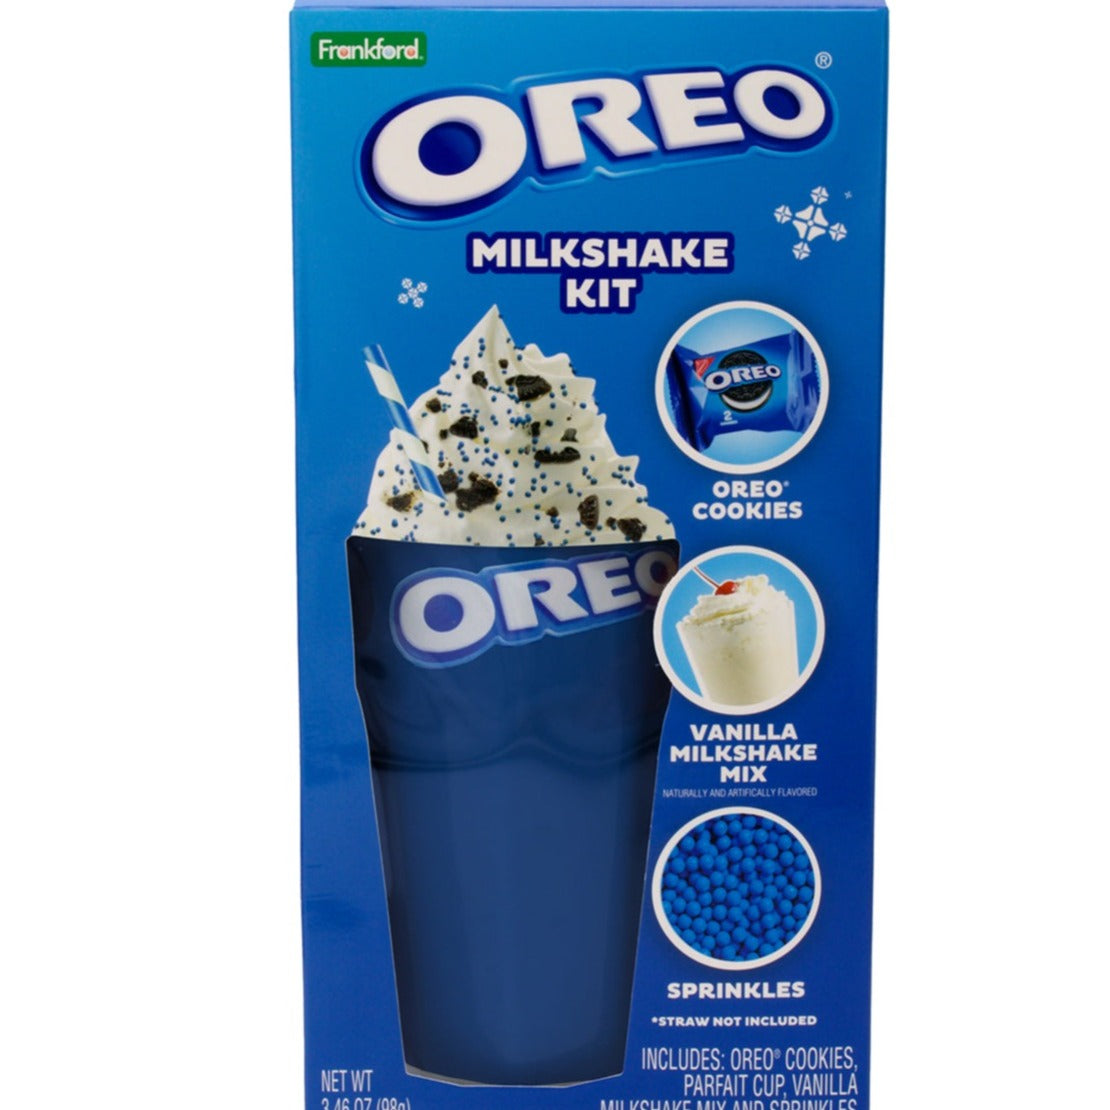 Snackolator - Frankford is bringing back their OREO Milkshake Kits along  with a Sour Patch Kids Milkshake Kit for the holidays and it sounds really  good! These are not exclusive to any